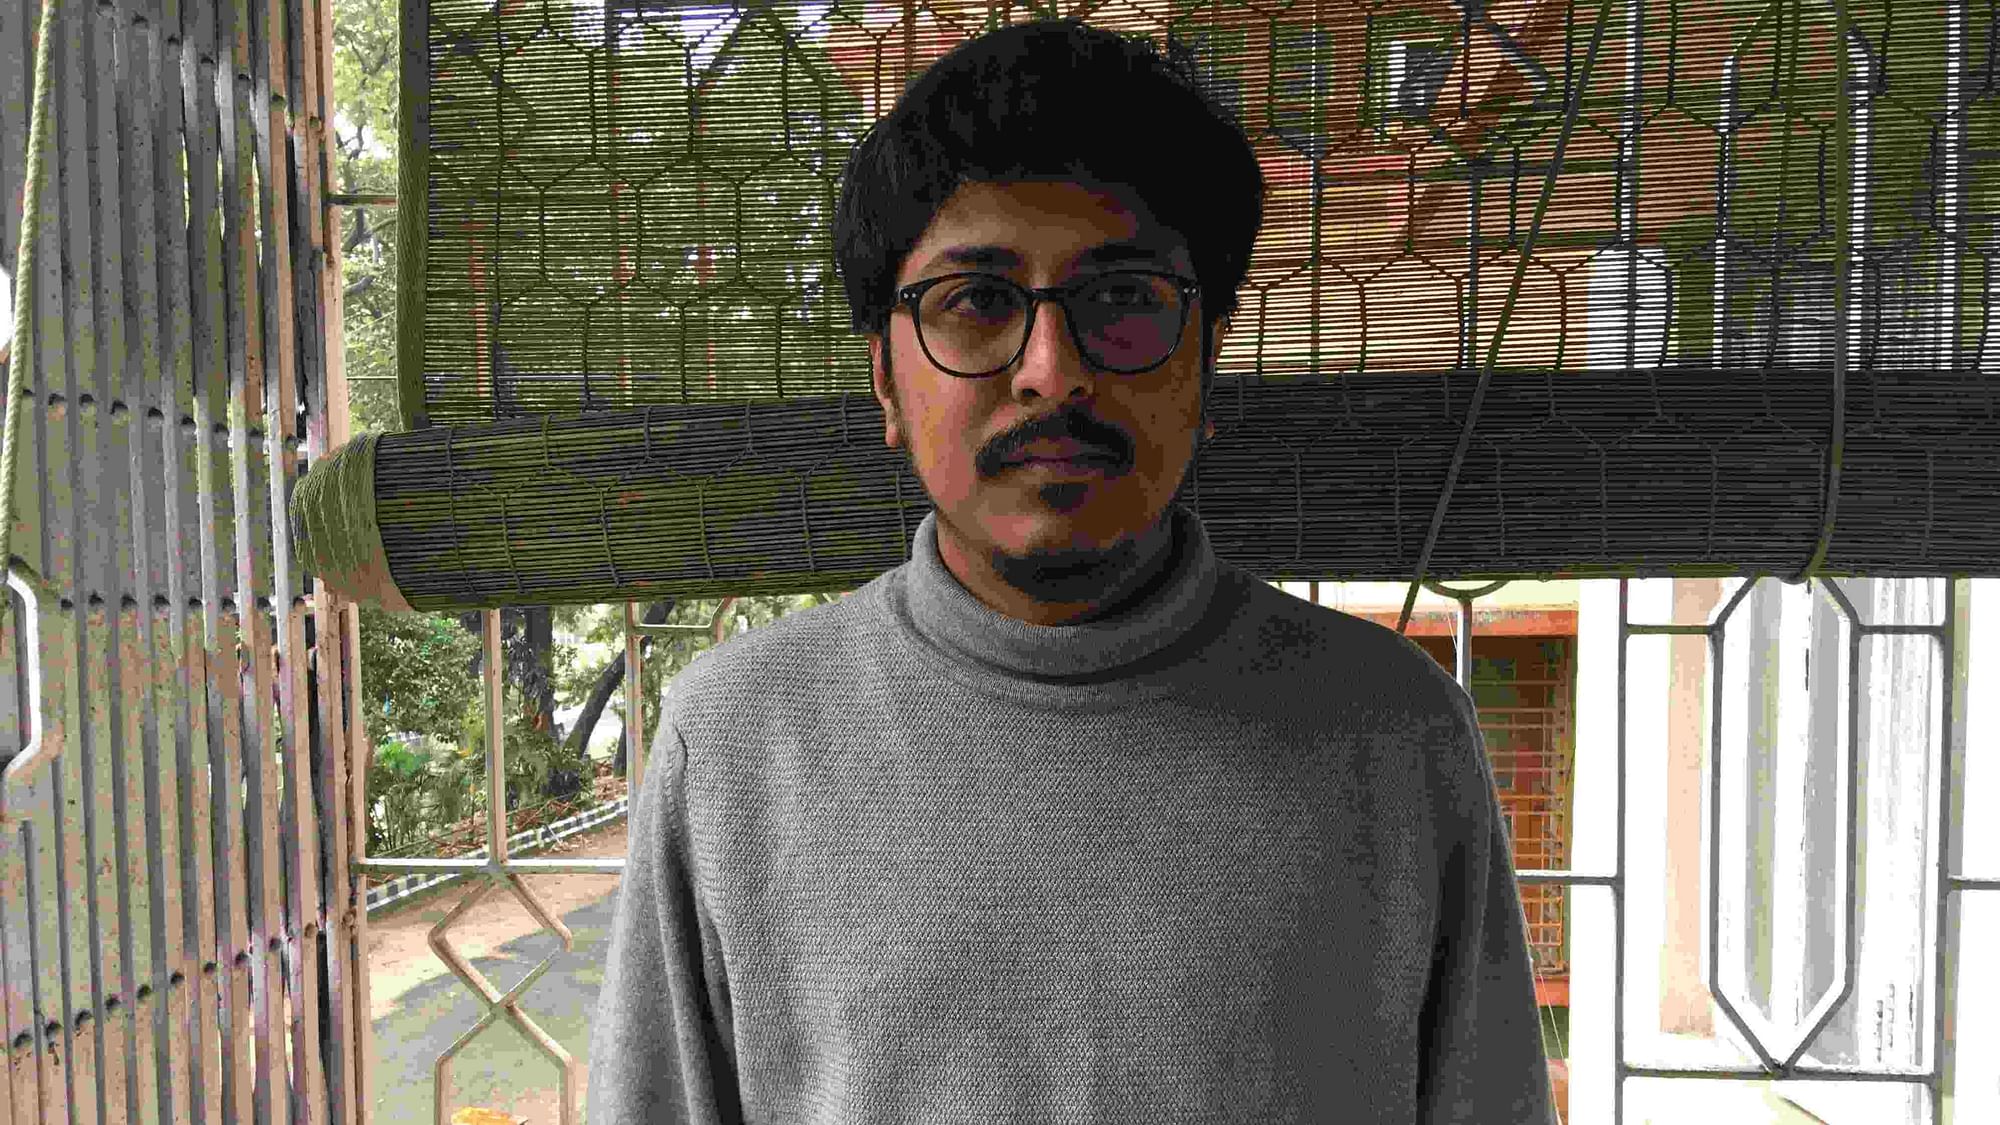 Filmmaker and photgrapher from Kolkata, Ronny Sen, was attacked with a dagger on 30 December for his posts on social media criticising the CAA. Sen says that the person who attacked was a seemingly ordinary citizen who’d grown up in the same area where he’d grown up.